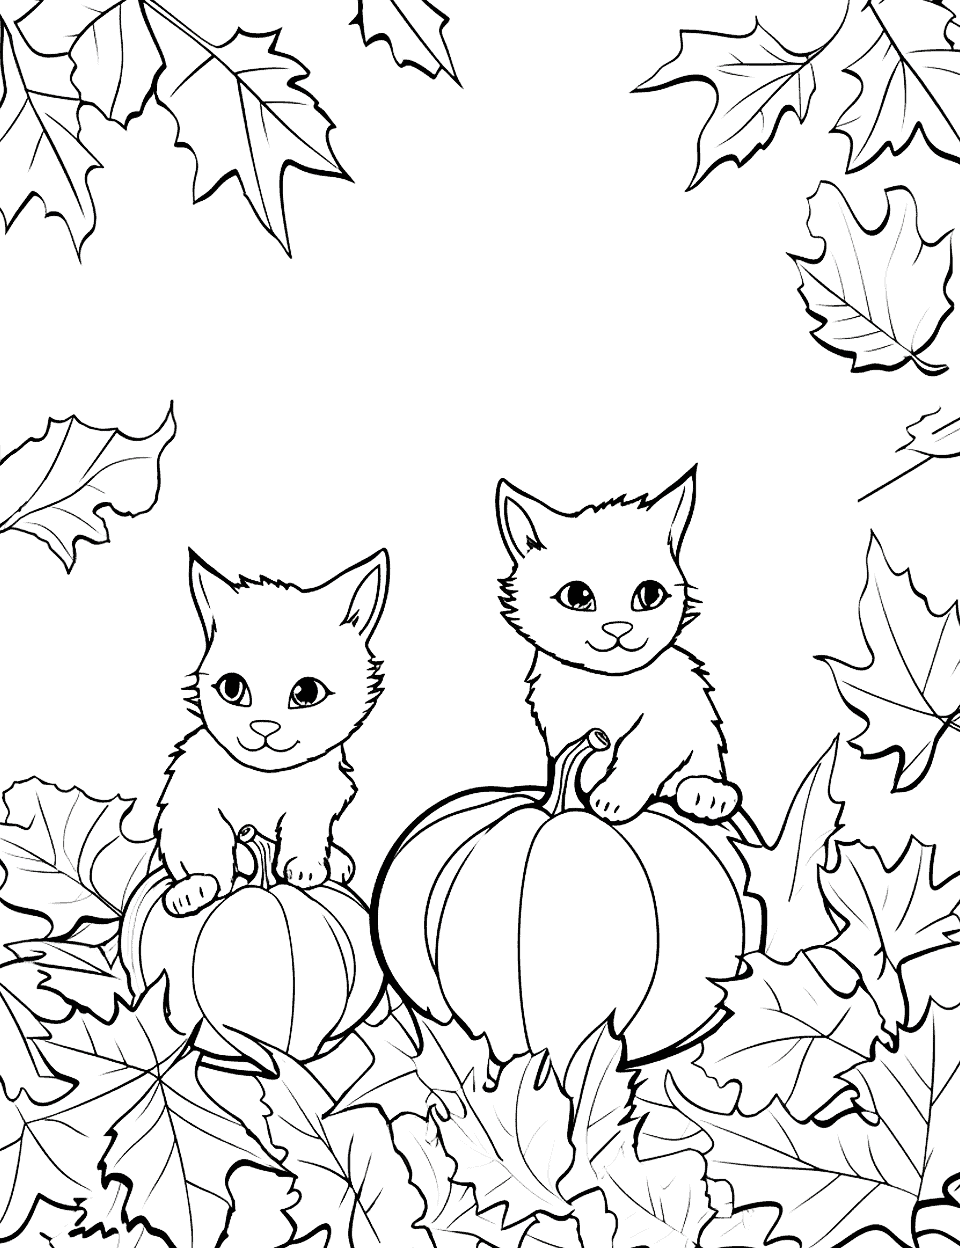 Kittens in Pumpkin Patch Fall Coloring Page - Cute kittens playing in a pumpkin patch, surrounded by fallen leaves.